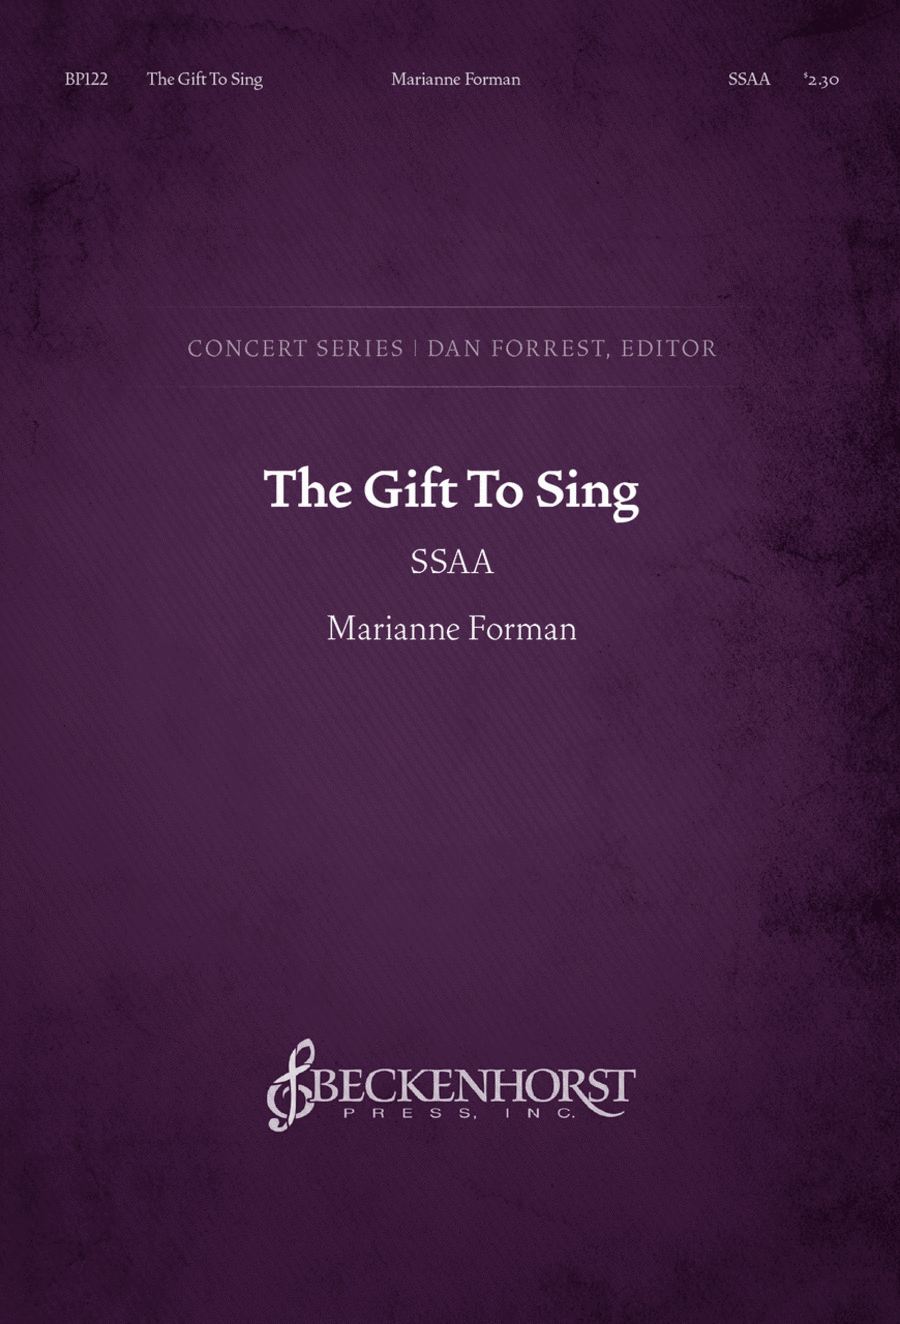 The Gift To Sing (SSAA)